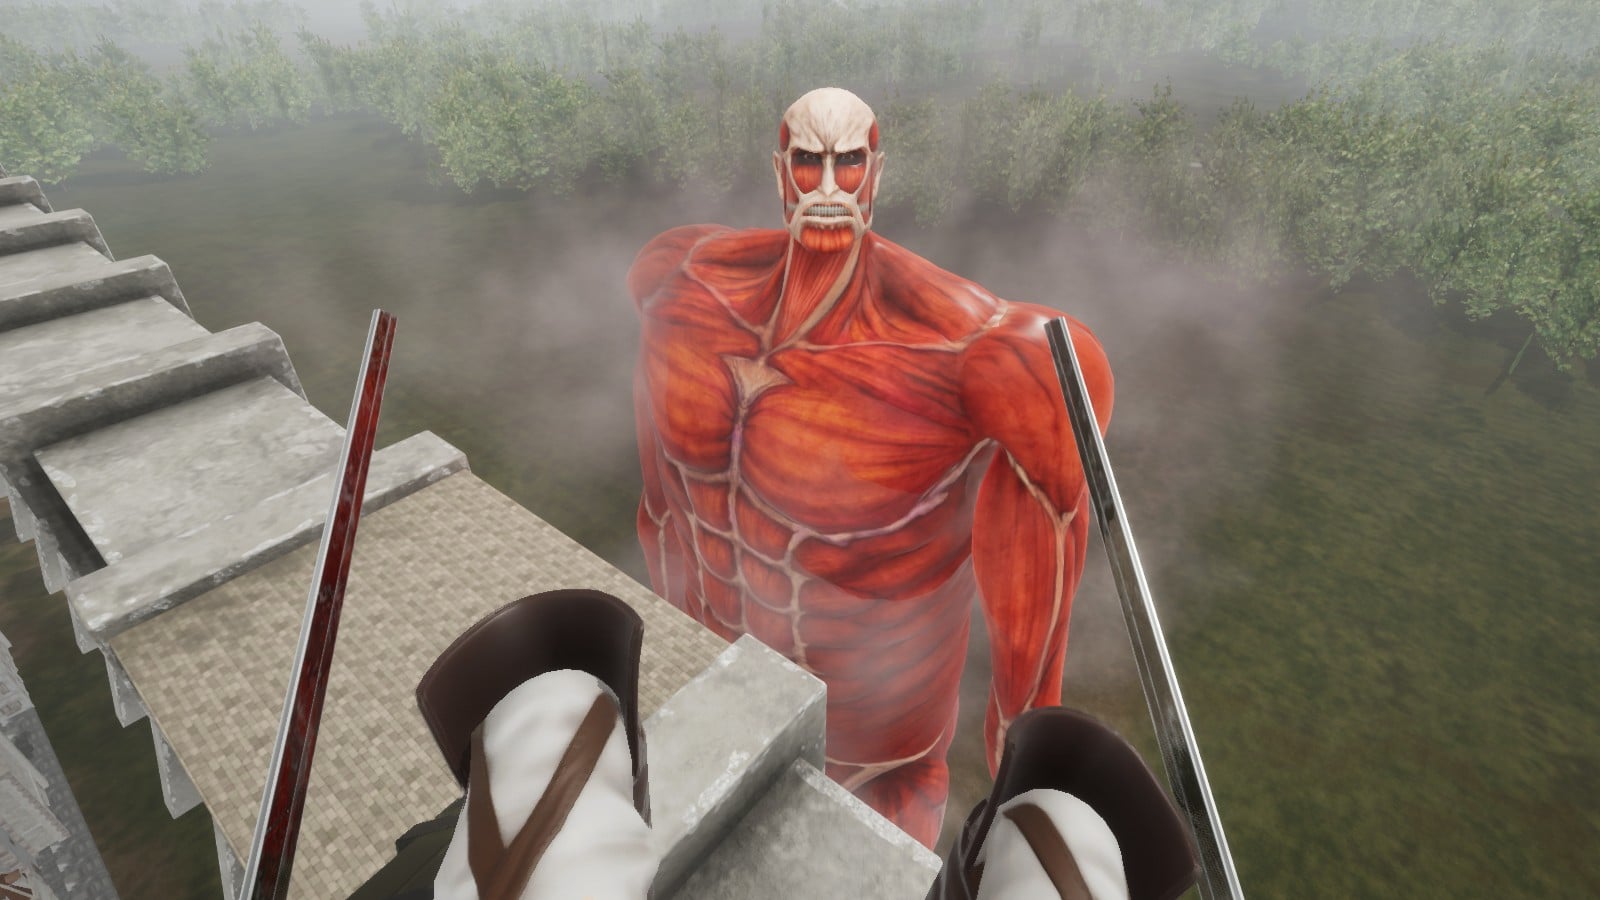 Fanmade 'Attack on Titan' Game With Over 10 Million Downloads Is